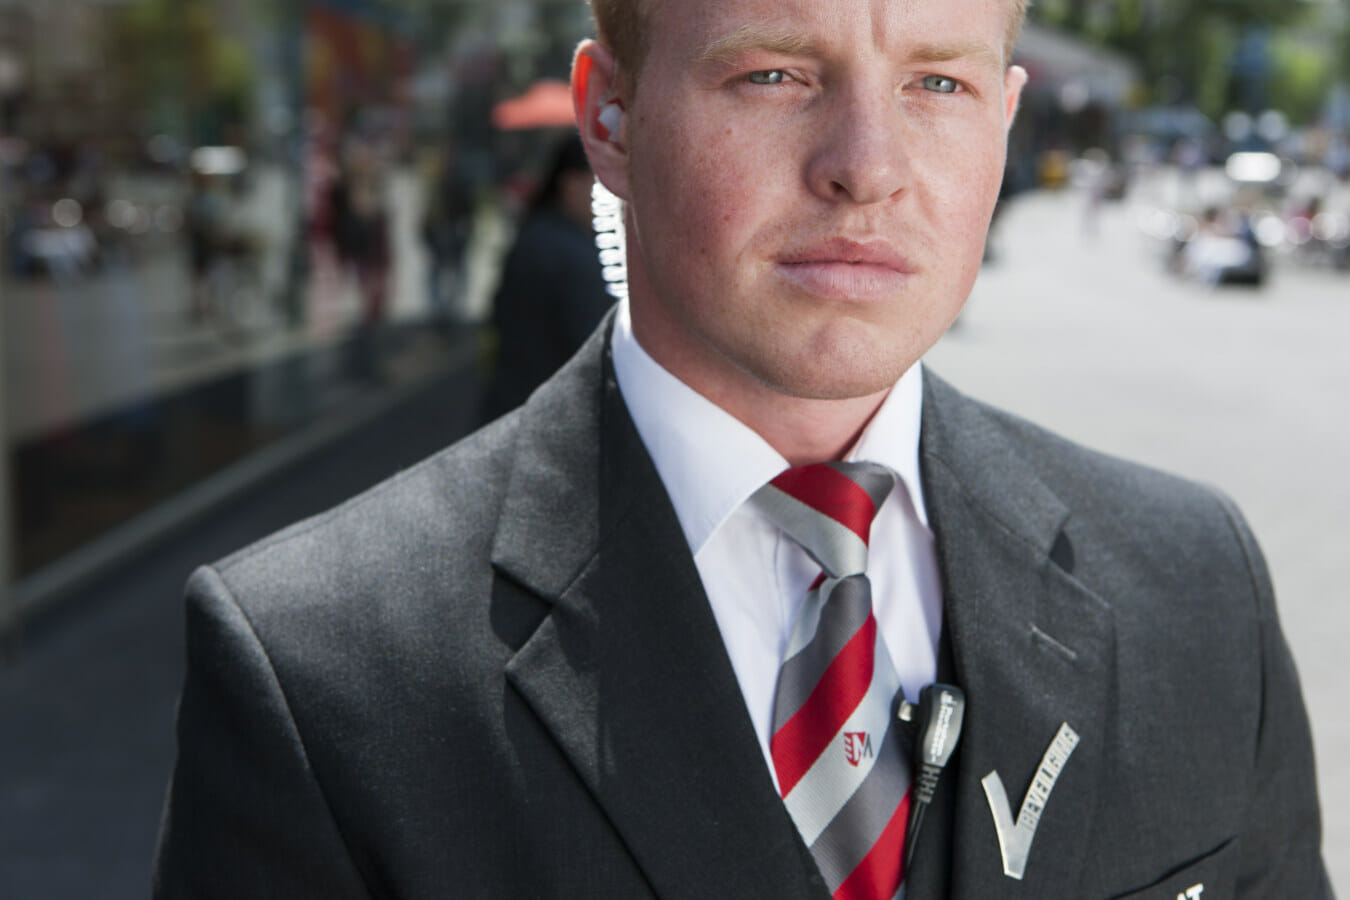 Profile of a retail security officer